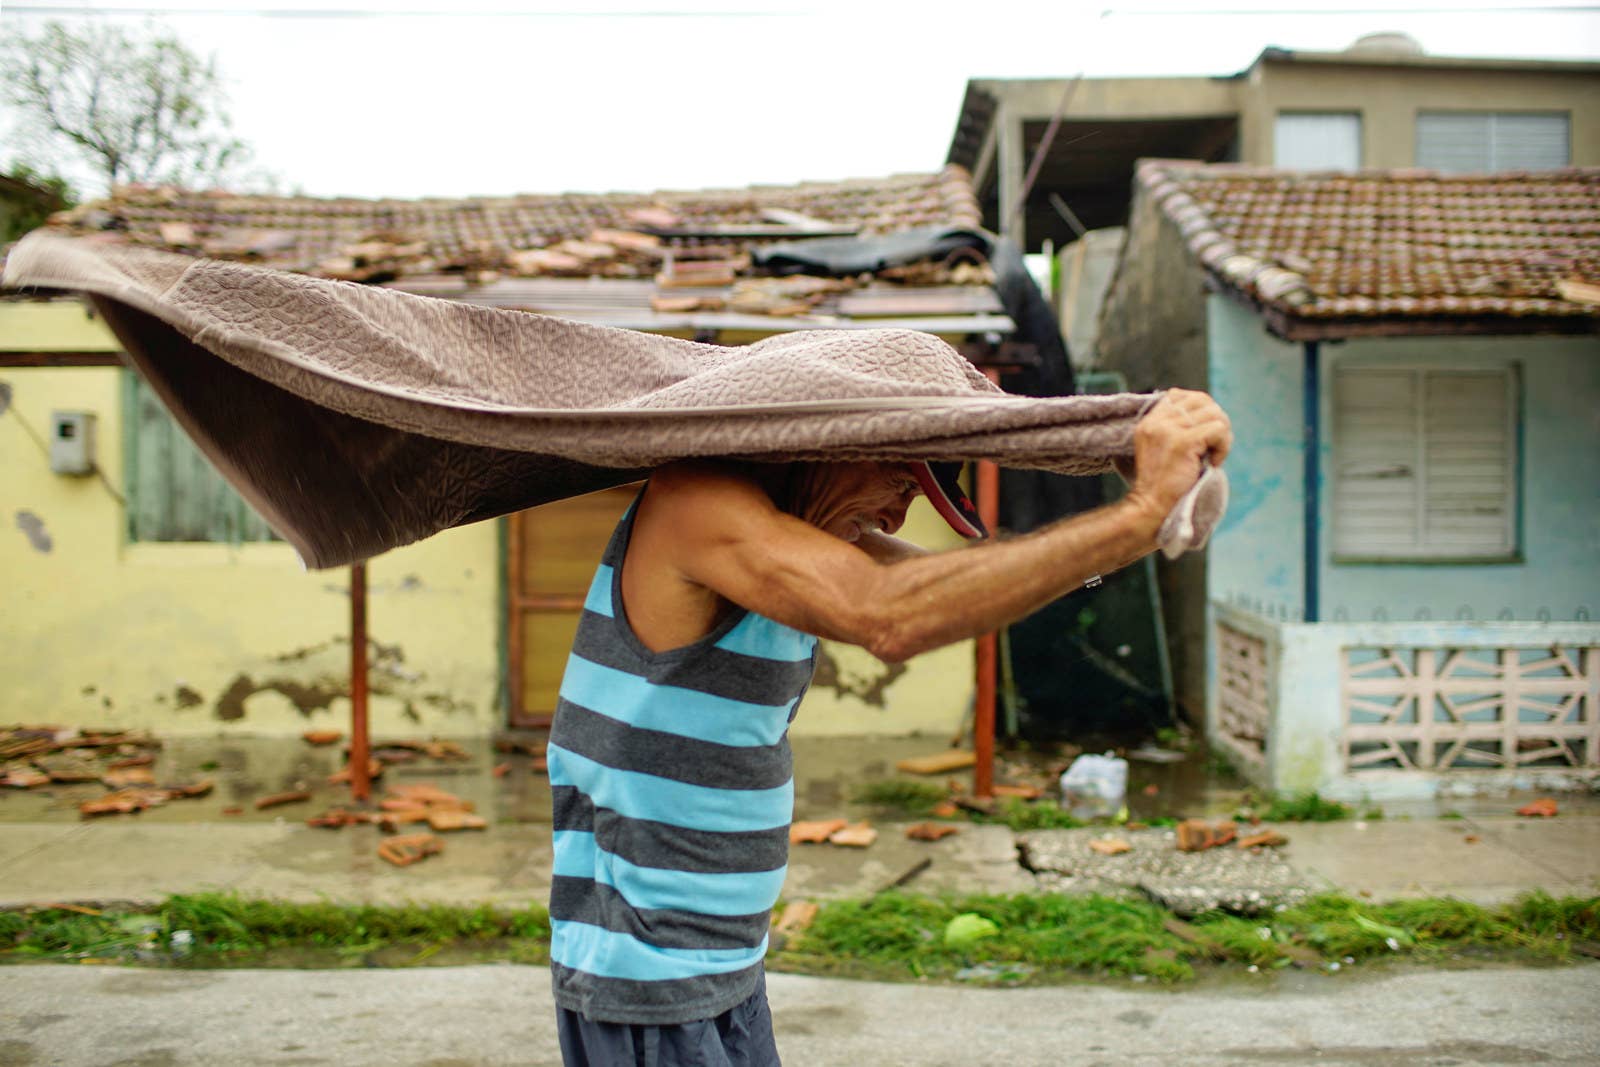 A man tries to shield himself from the rain.